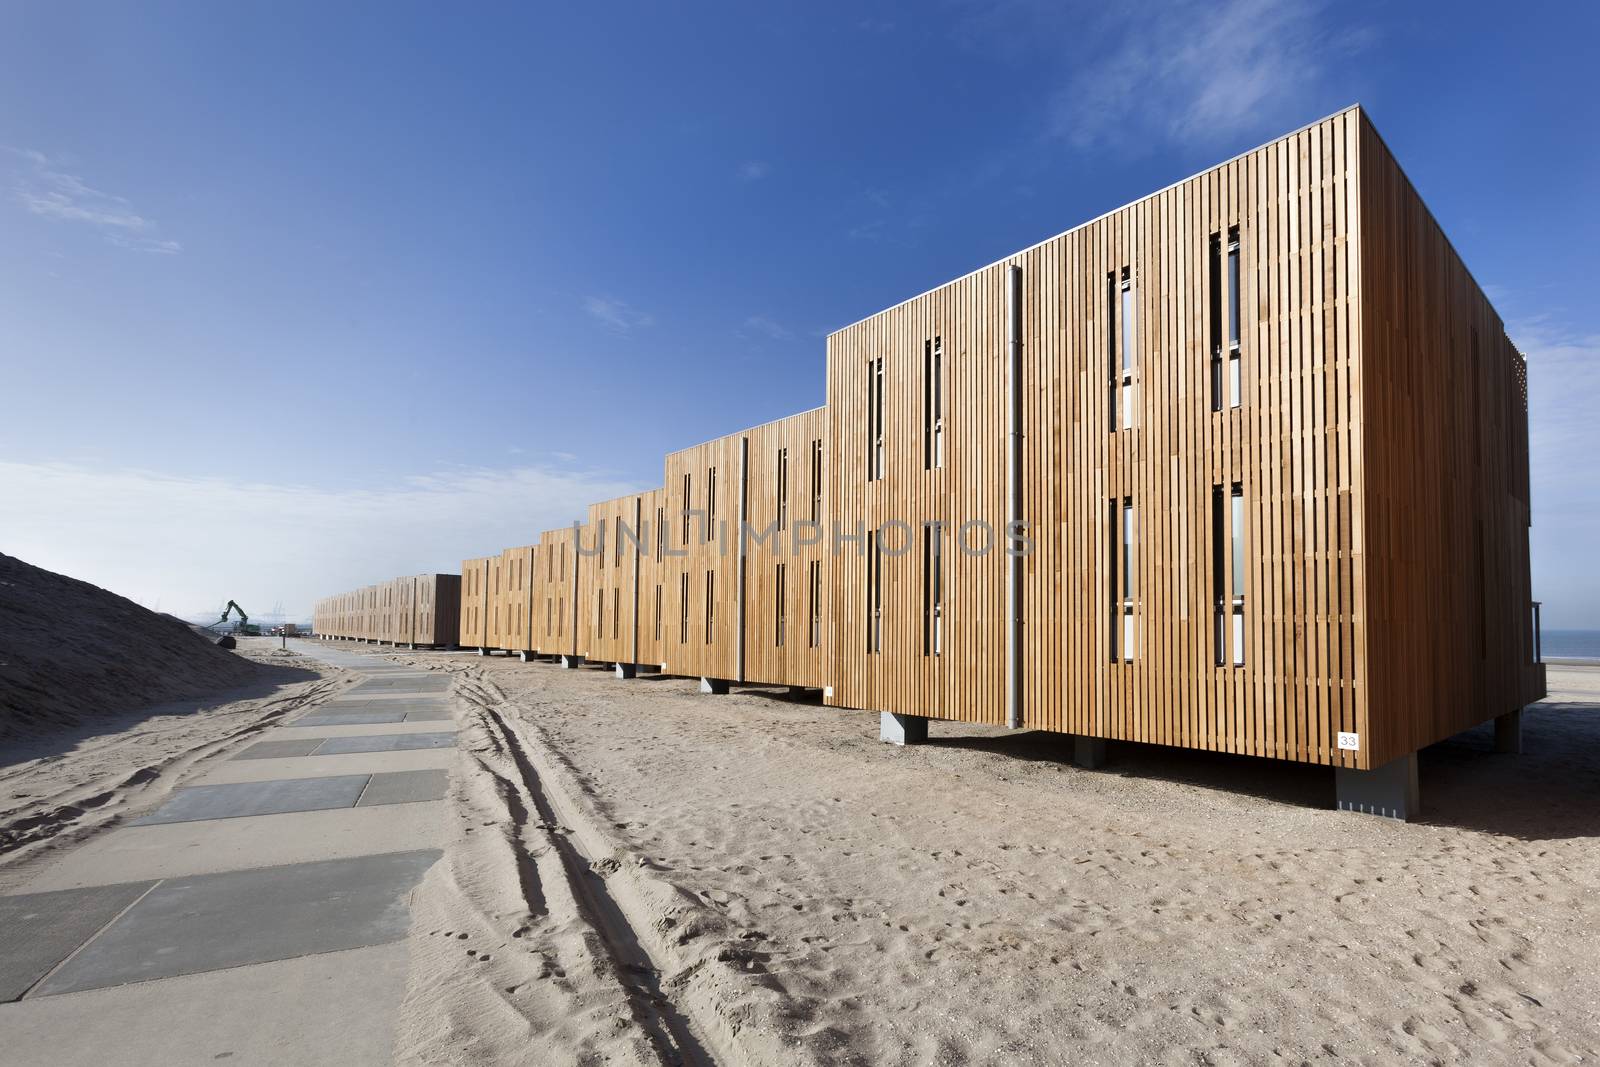 Apartments on the beach of Hoek van Holland in the Netherlands